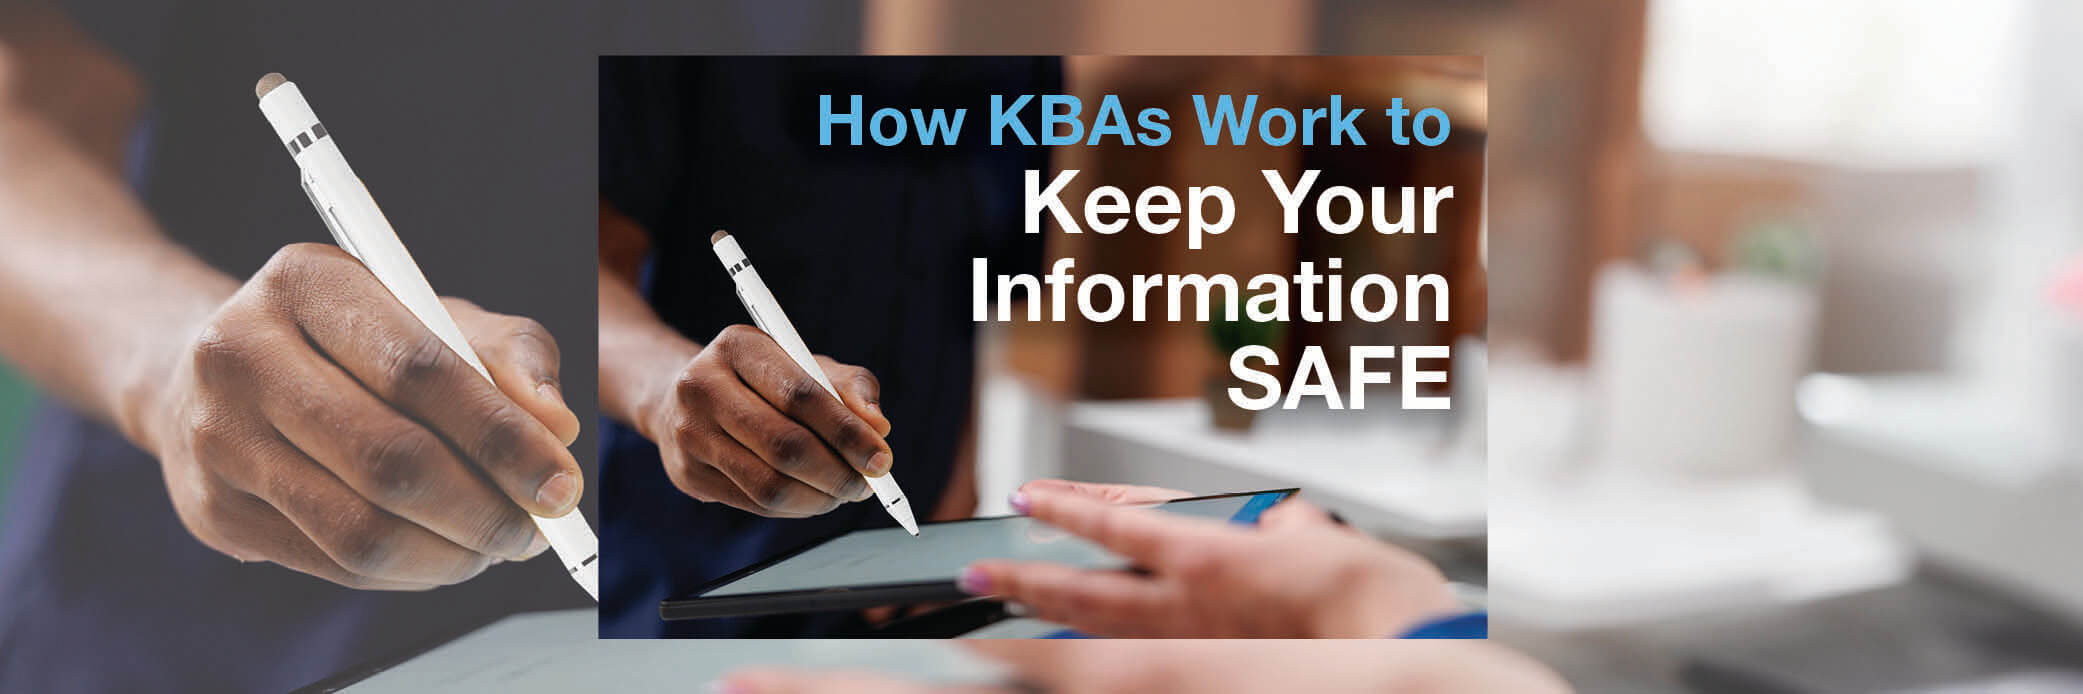 How KBAs Work to Keep Your Information Safe